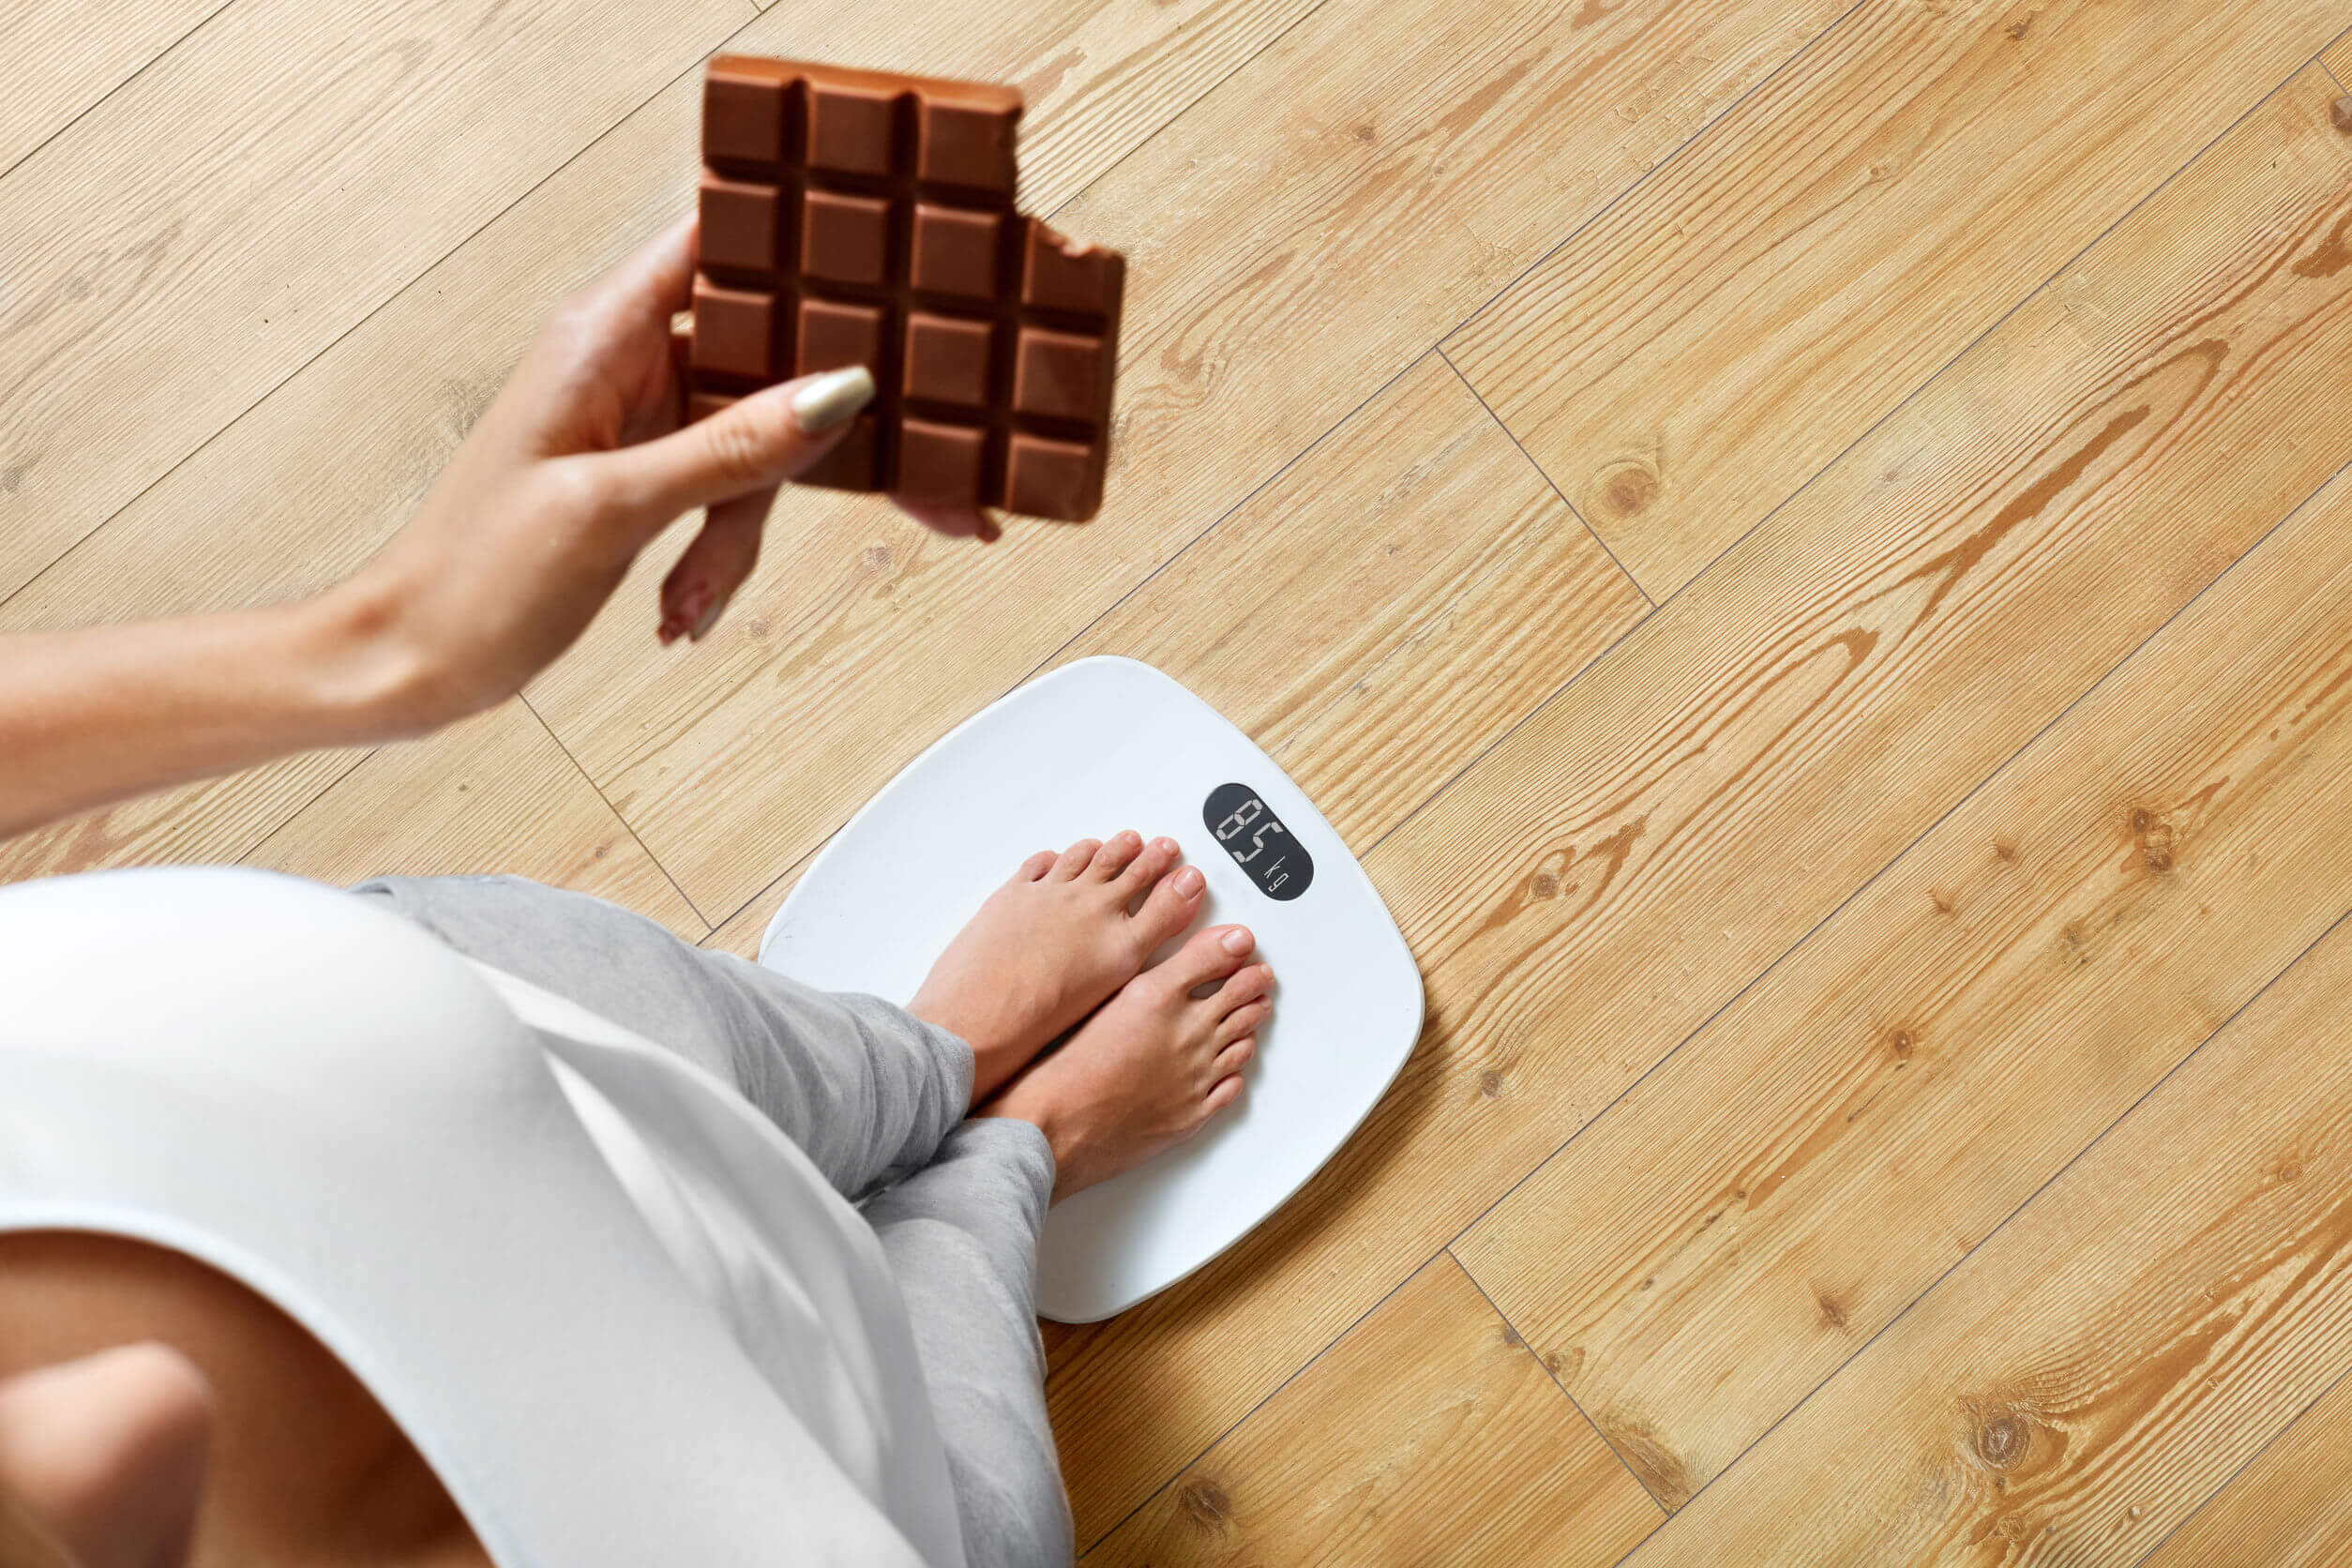 Diet. Young Woman Standing On Weighing Scale And Holding Chocolate Bar. Sweets Are Unhealthy Junk Food. Sugar Is Bad For Health. Dieting, Healthy Eating, Lifestyle. Weight Loss. Top View